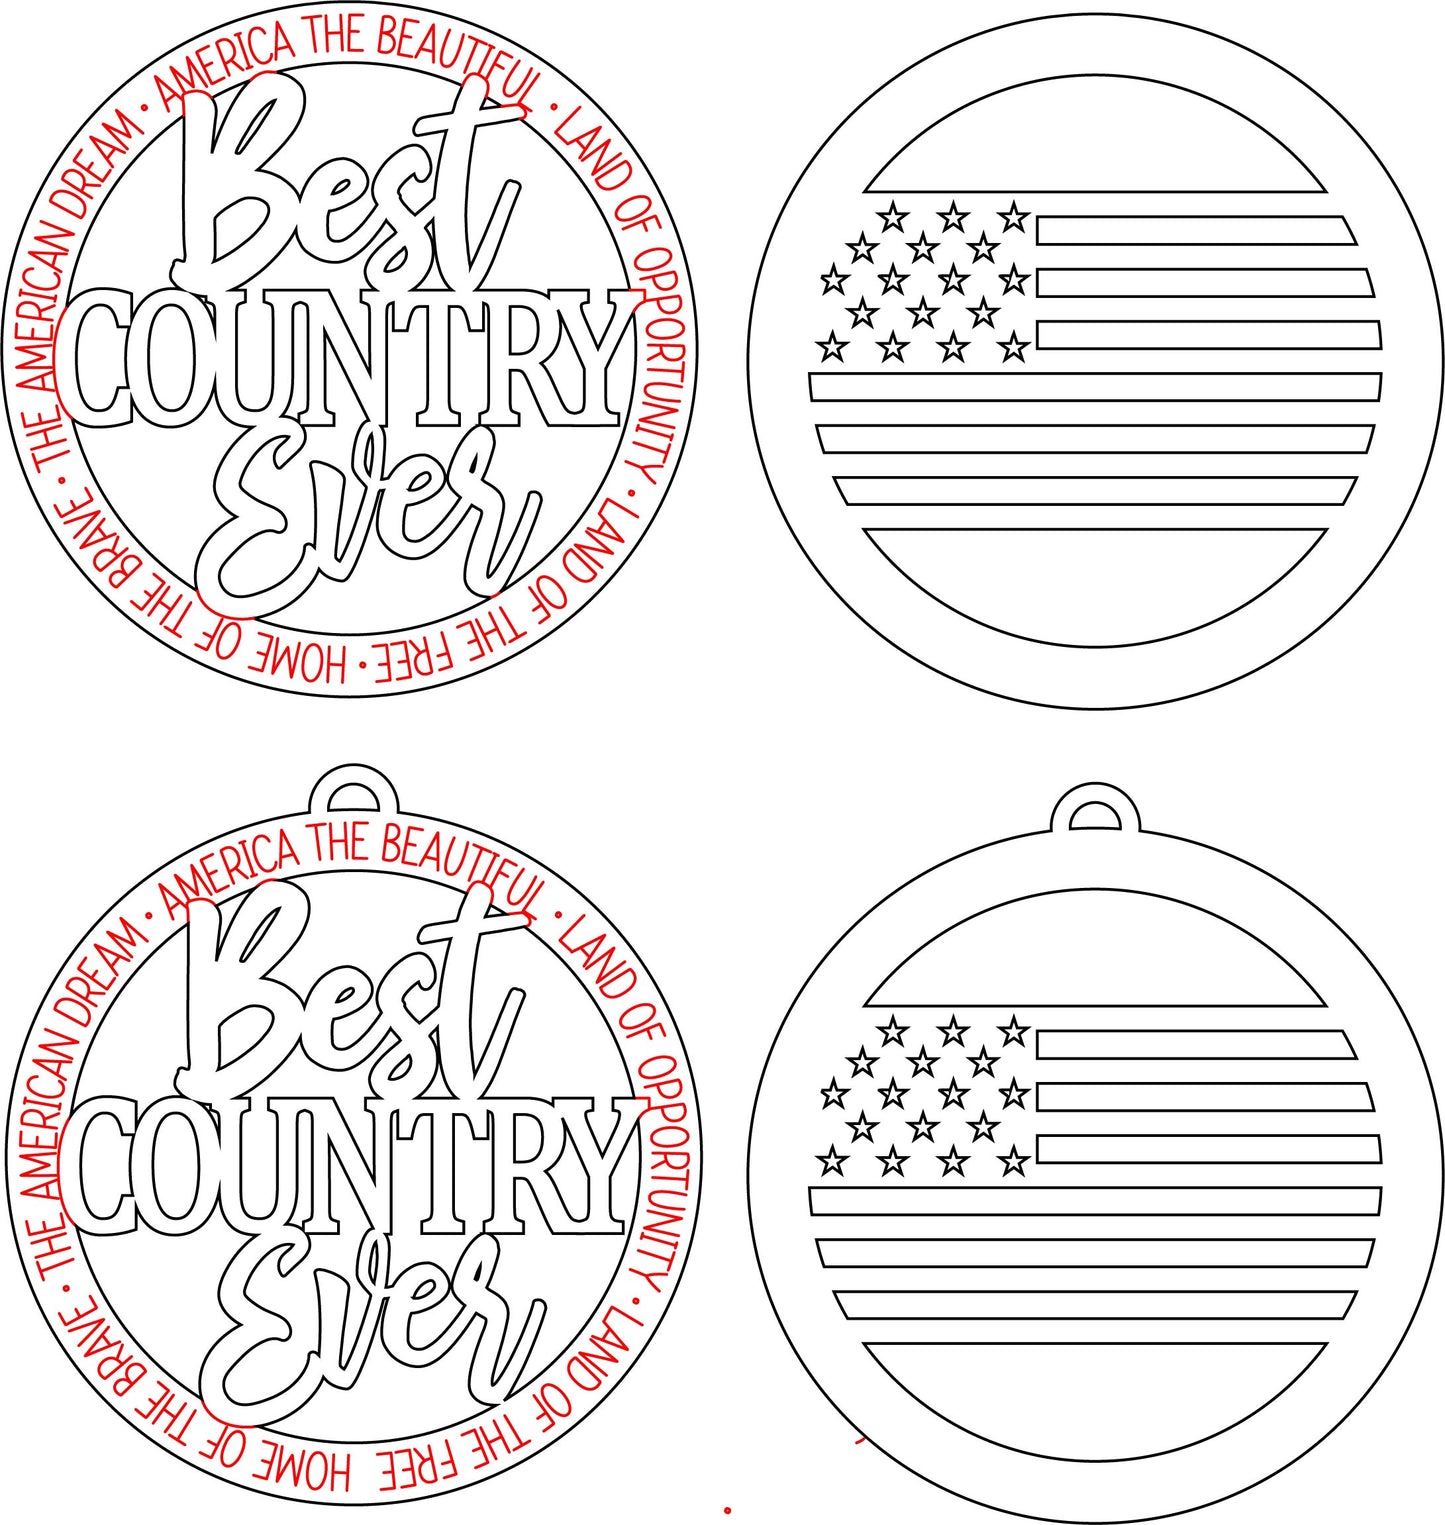 Best country ever wall hanging svg - 4th of July decor DIGITAL FILE - American flag svg - Ornament version included - Cut and score laser file made for Glowforge